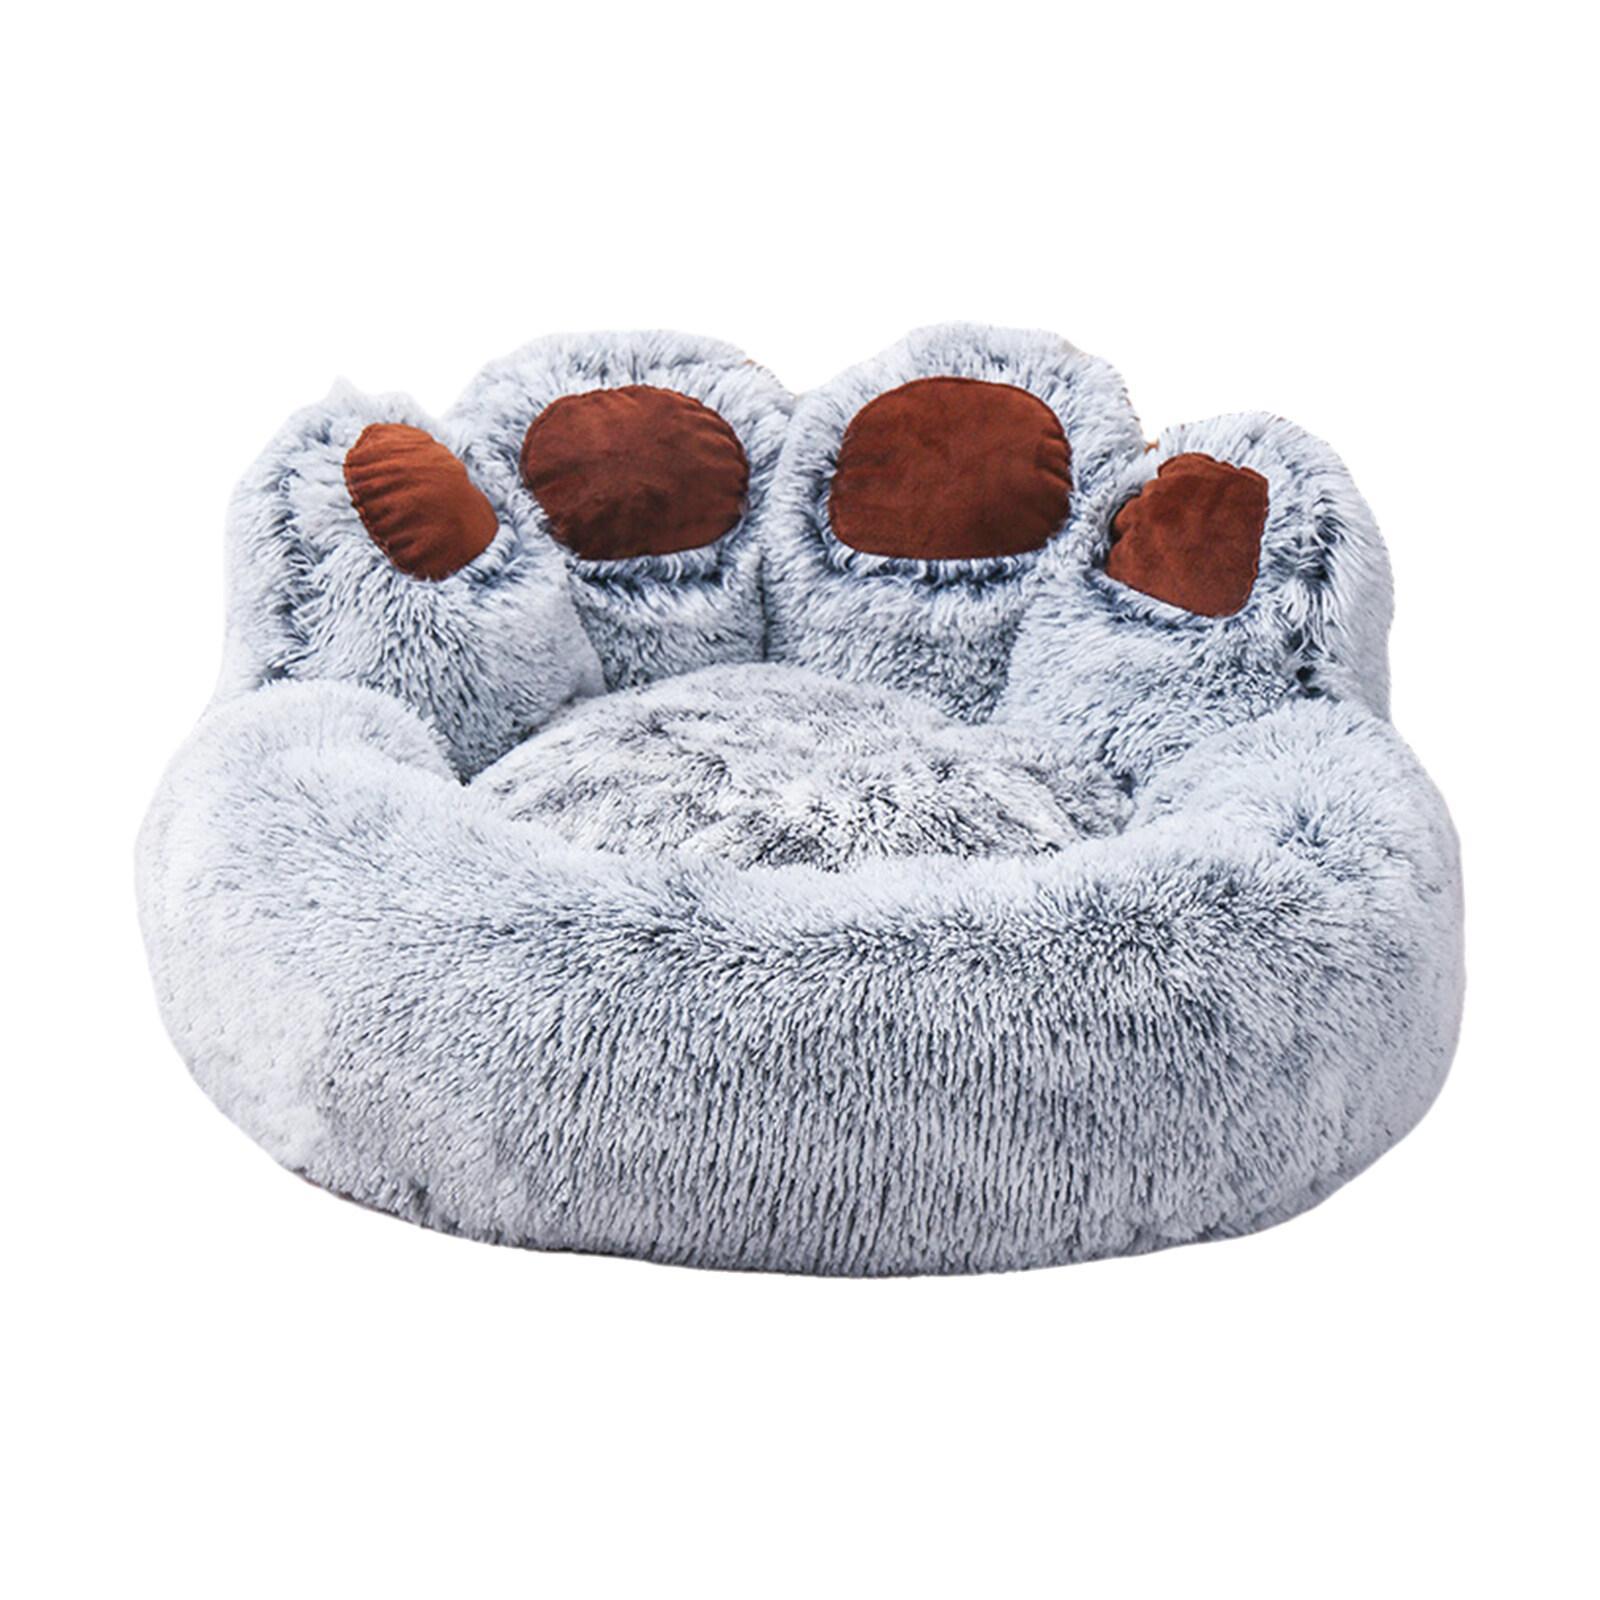 Plush Dog Bed Bear Paw Shape Pet Bed for Cats and Dogs Cute Soft Dog Basket